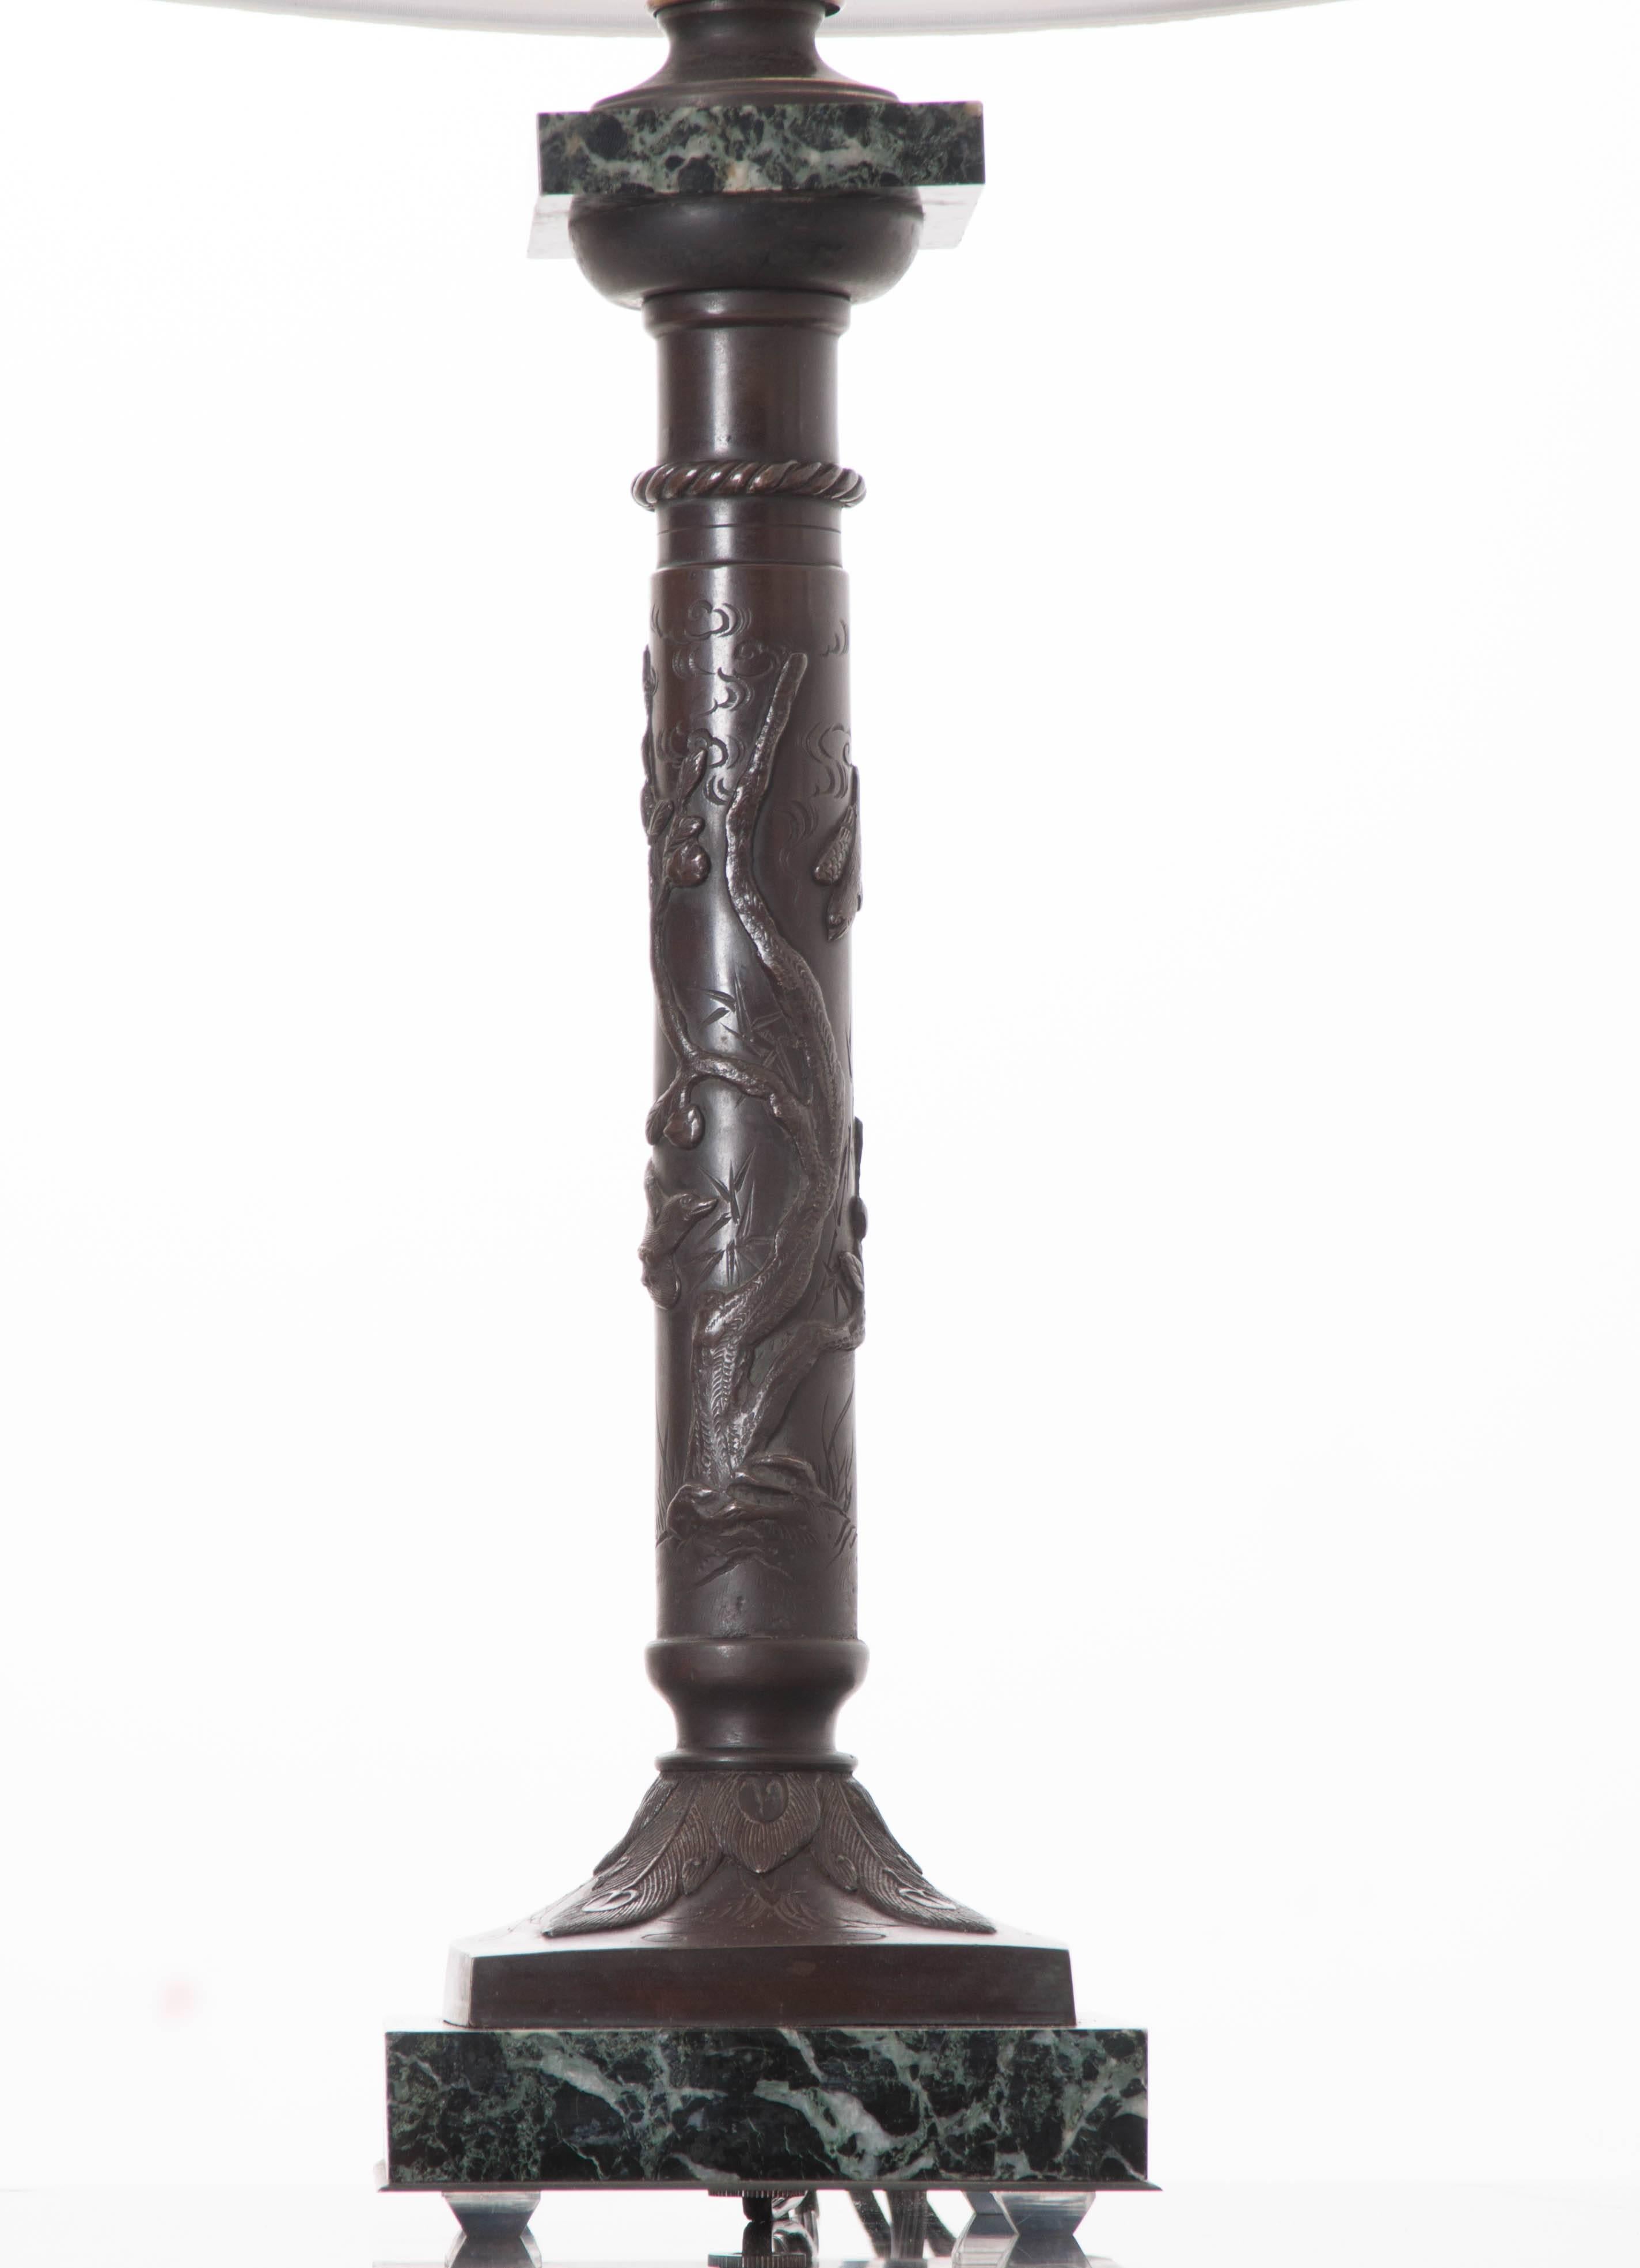 French 19th Century Bronze and Marble Decorative Lamp In Good Condition For Sale In Baton Rouge, LA